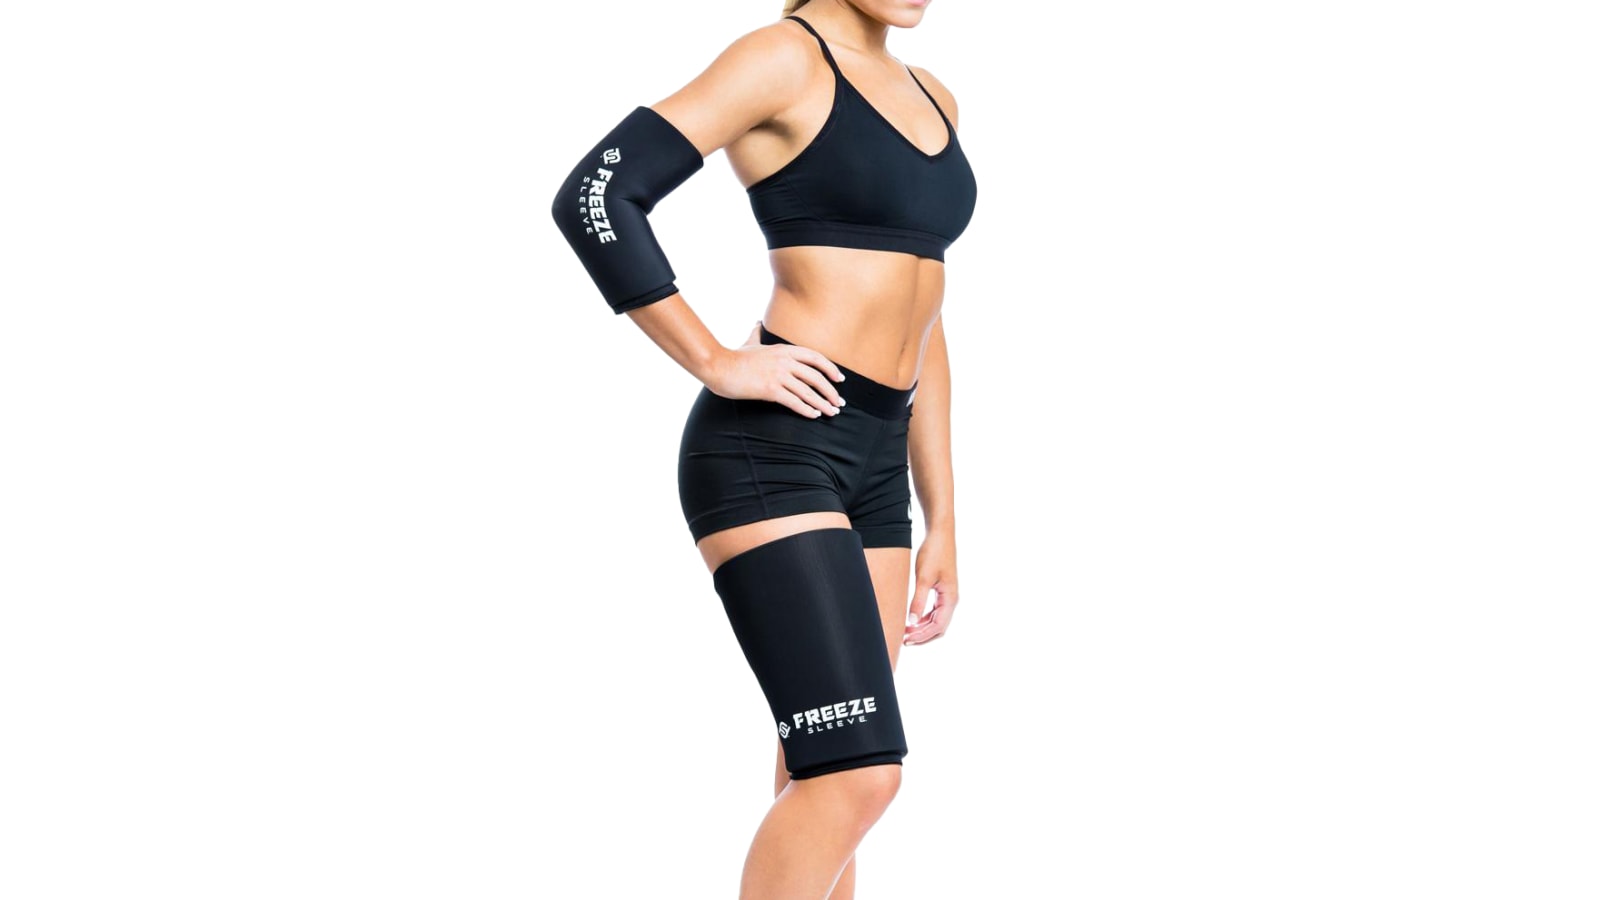 Cold compression sleeve – Fiix Body